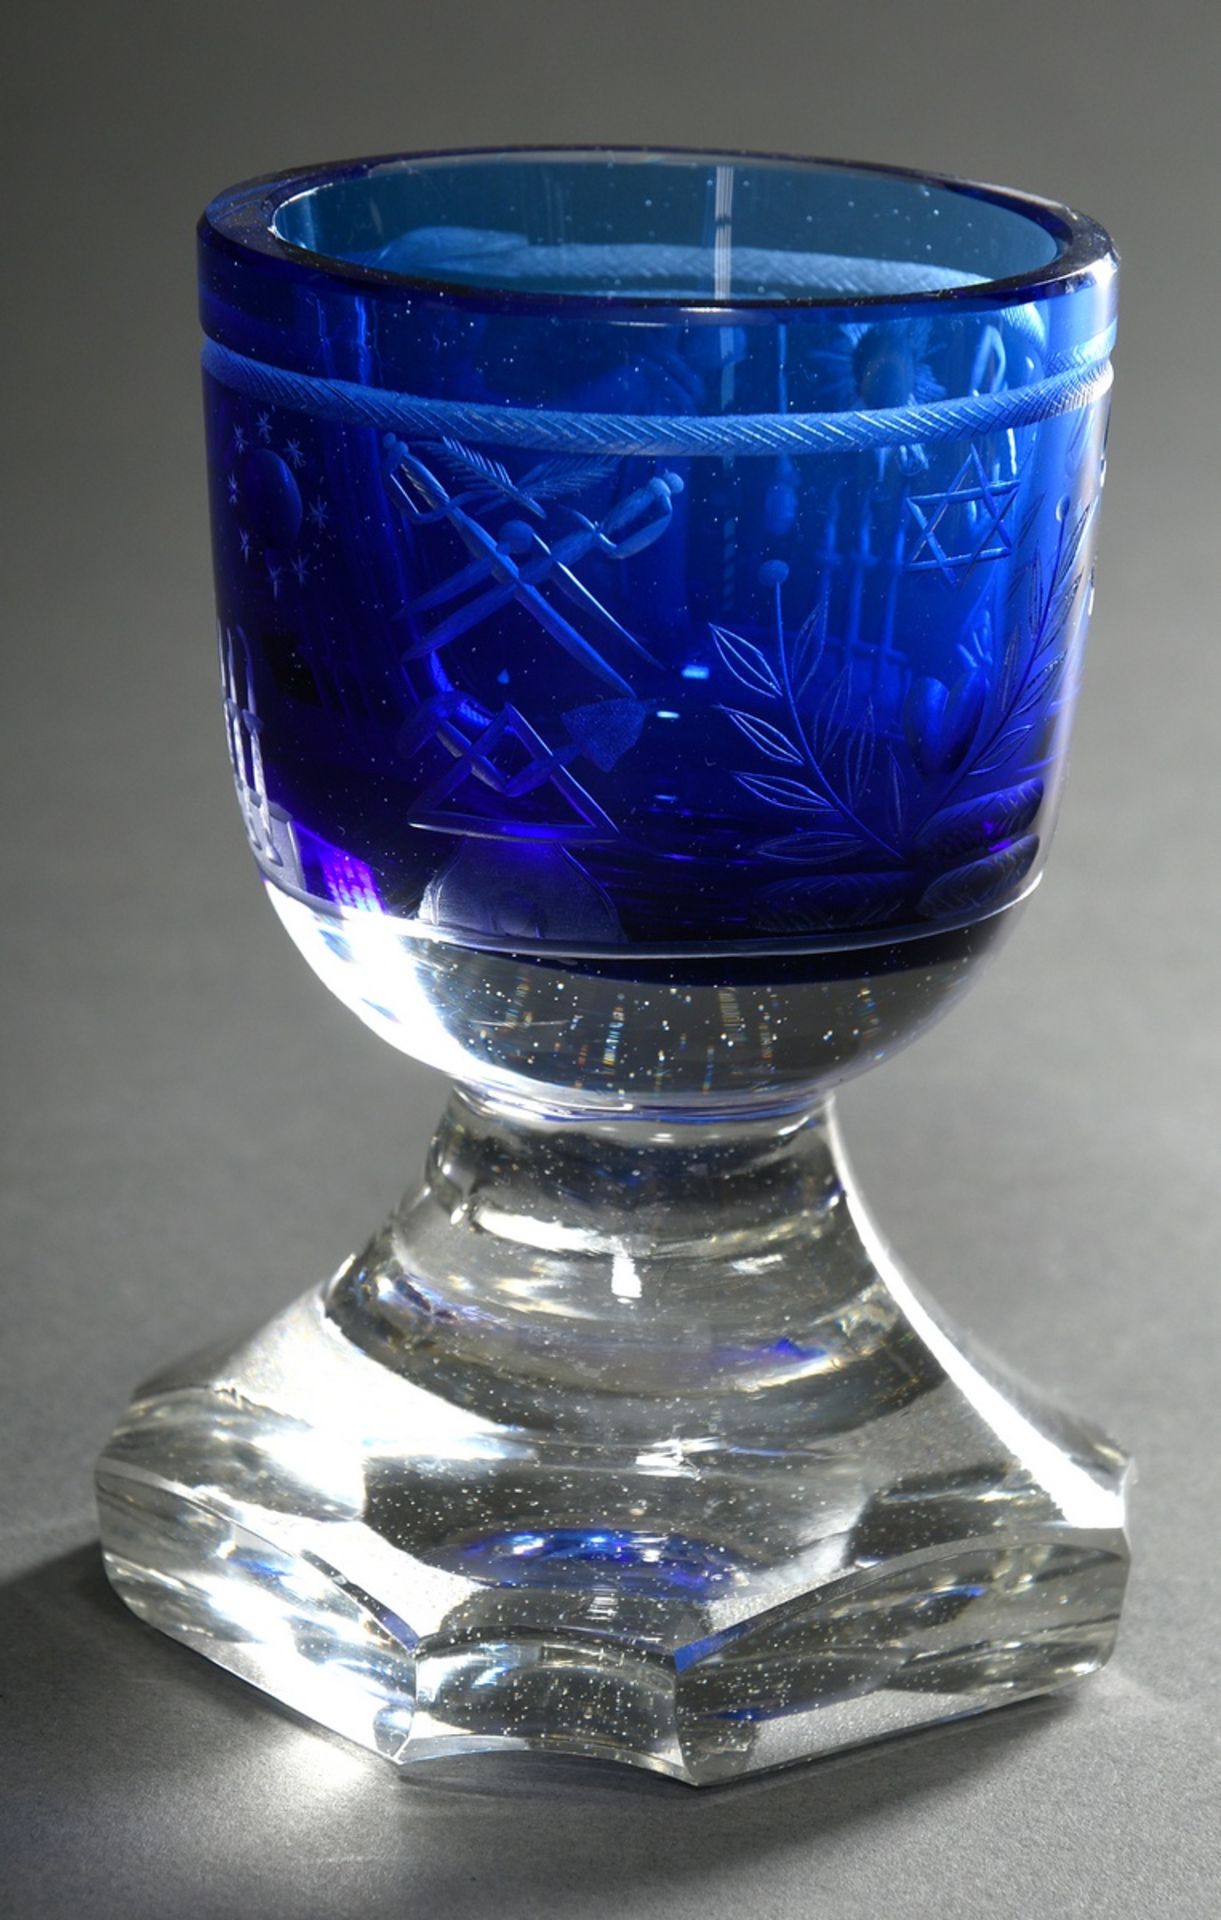 Thick-walled Masonic foot cup with cobalt blue etched dome, deeply cut symbols and constricted neck